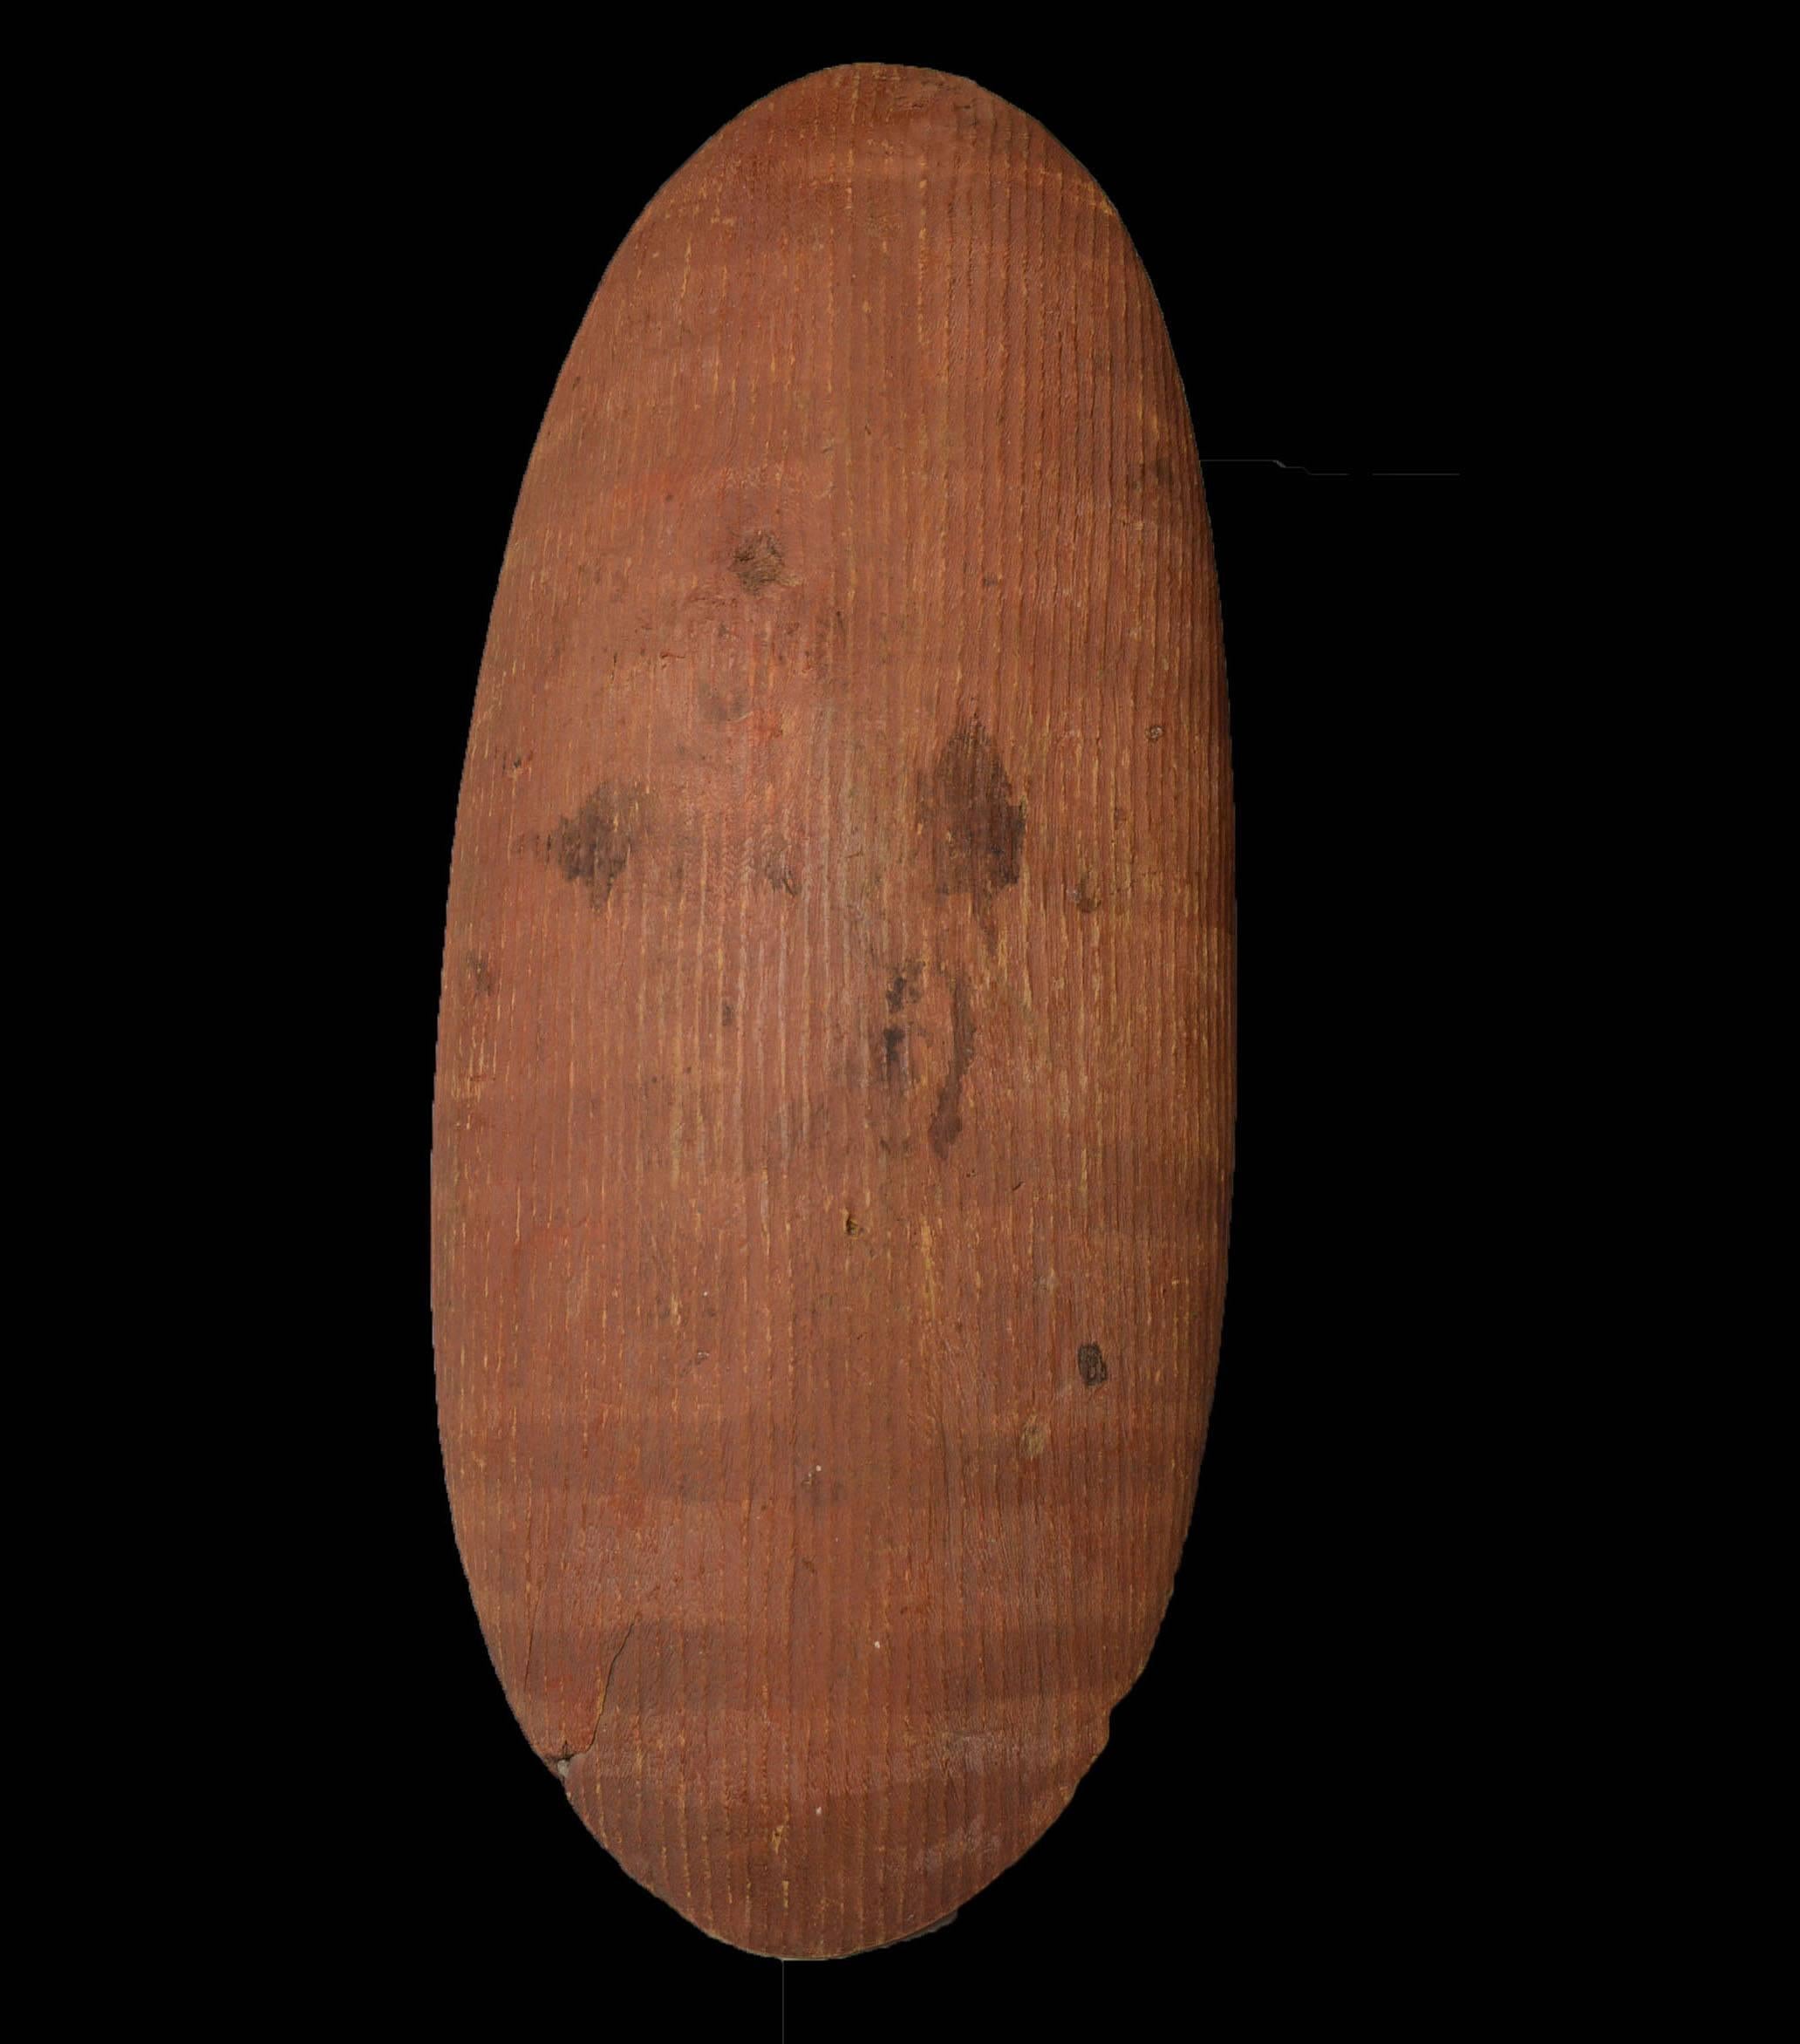 A large Aboriginal central desert bean wood shield,

Superb fine large example carved with beautiful stone carved undulating interior,

the exterior with linear bands, covered over all with red pigment,

Measure: Height 72 cm,

Period: Early 20th